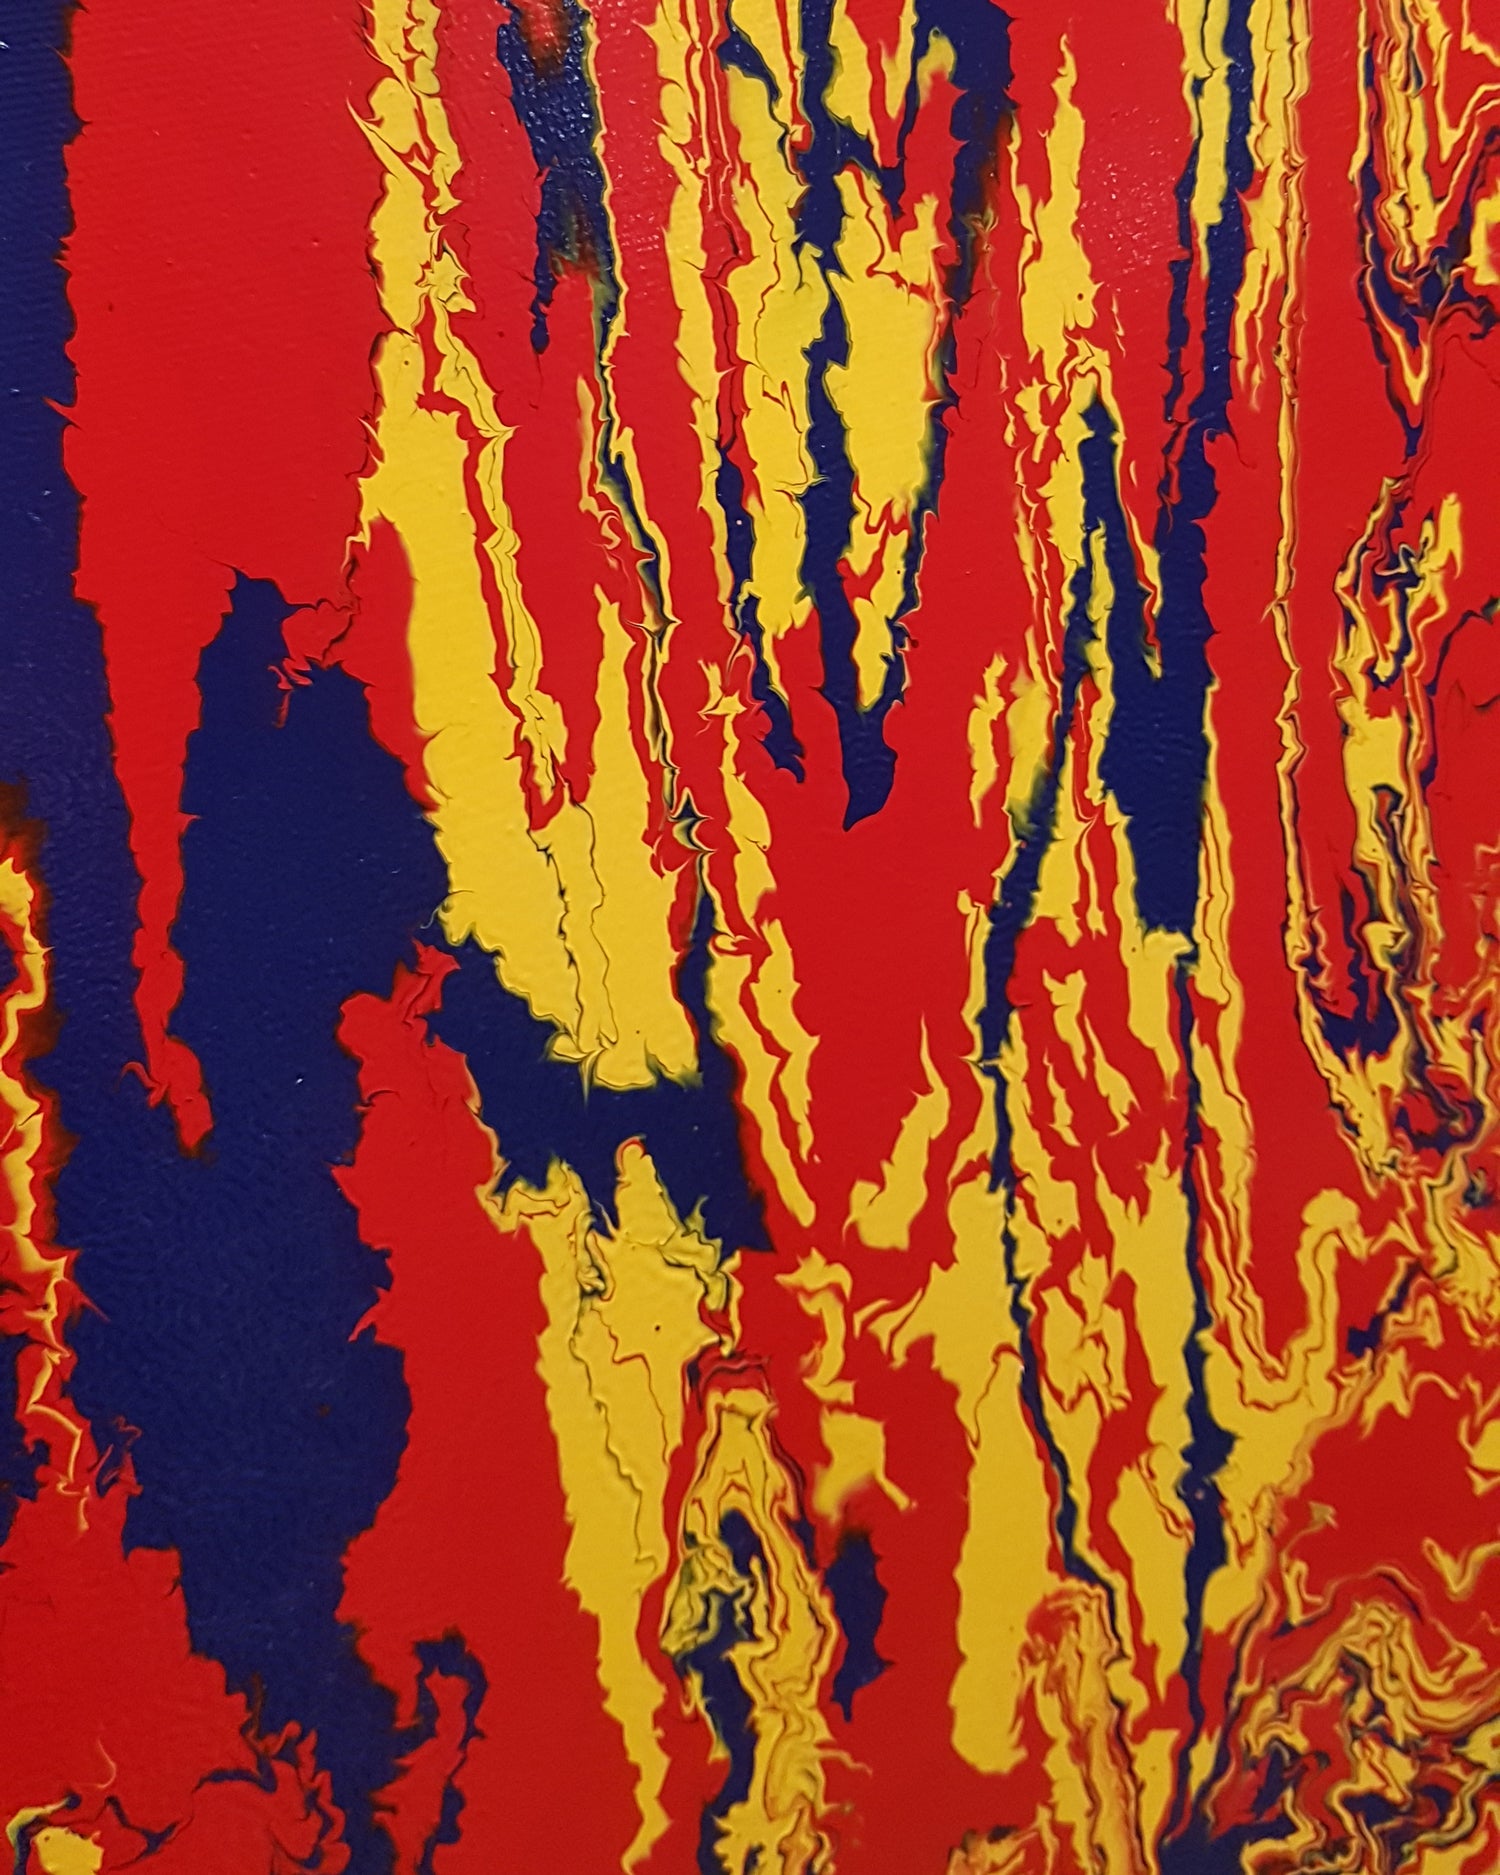 Primary-Bliss-by-Alexandra-Romano-Original-Abstract-Painting-Primary-Colors-Blue-Red-Yellow